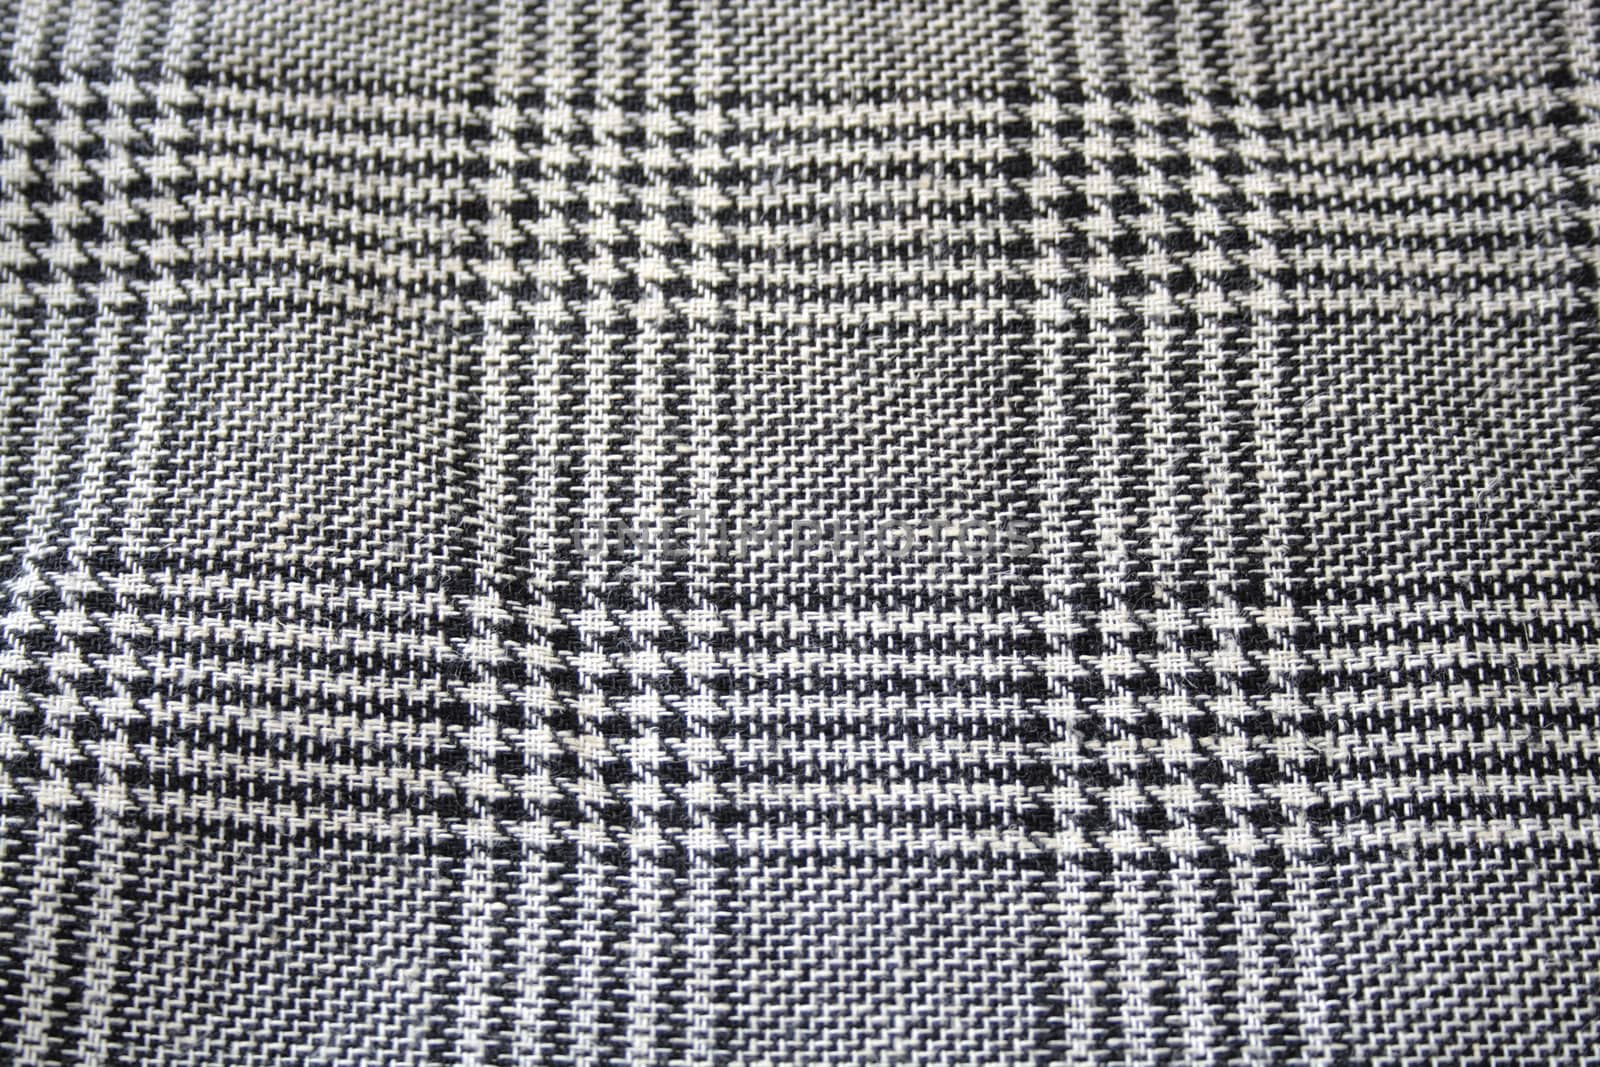 a classic houndstooth pattern in black and white